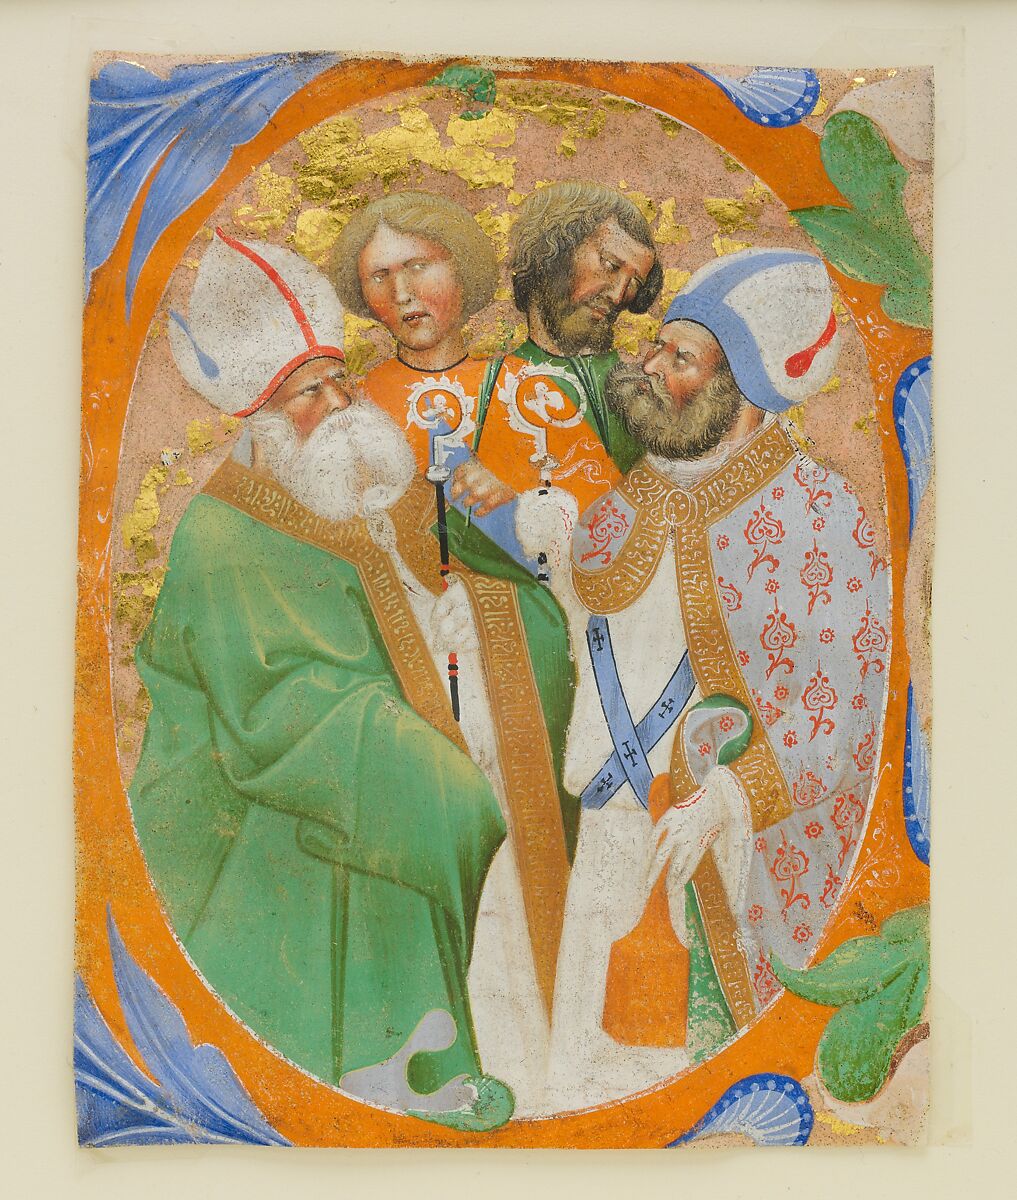 Manuscript Illumination with Four Saints in an Initial O, from a Choir Book, Master of the Murano Gradual (active ca. 1430–60), Tempera, gold, and ink on parchment, Italian 